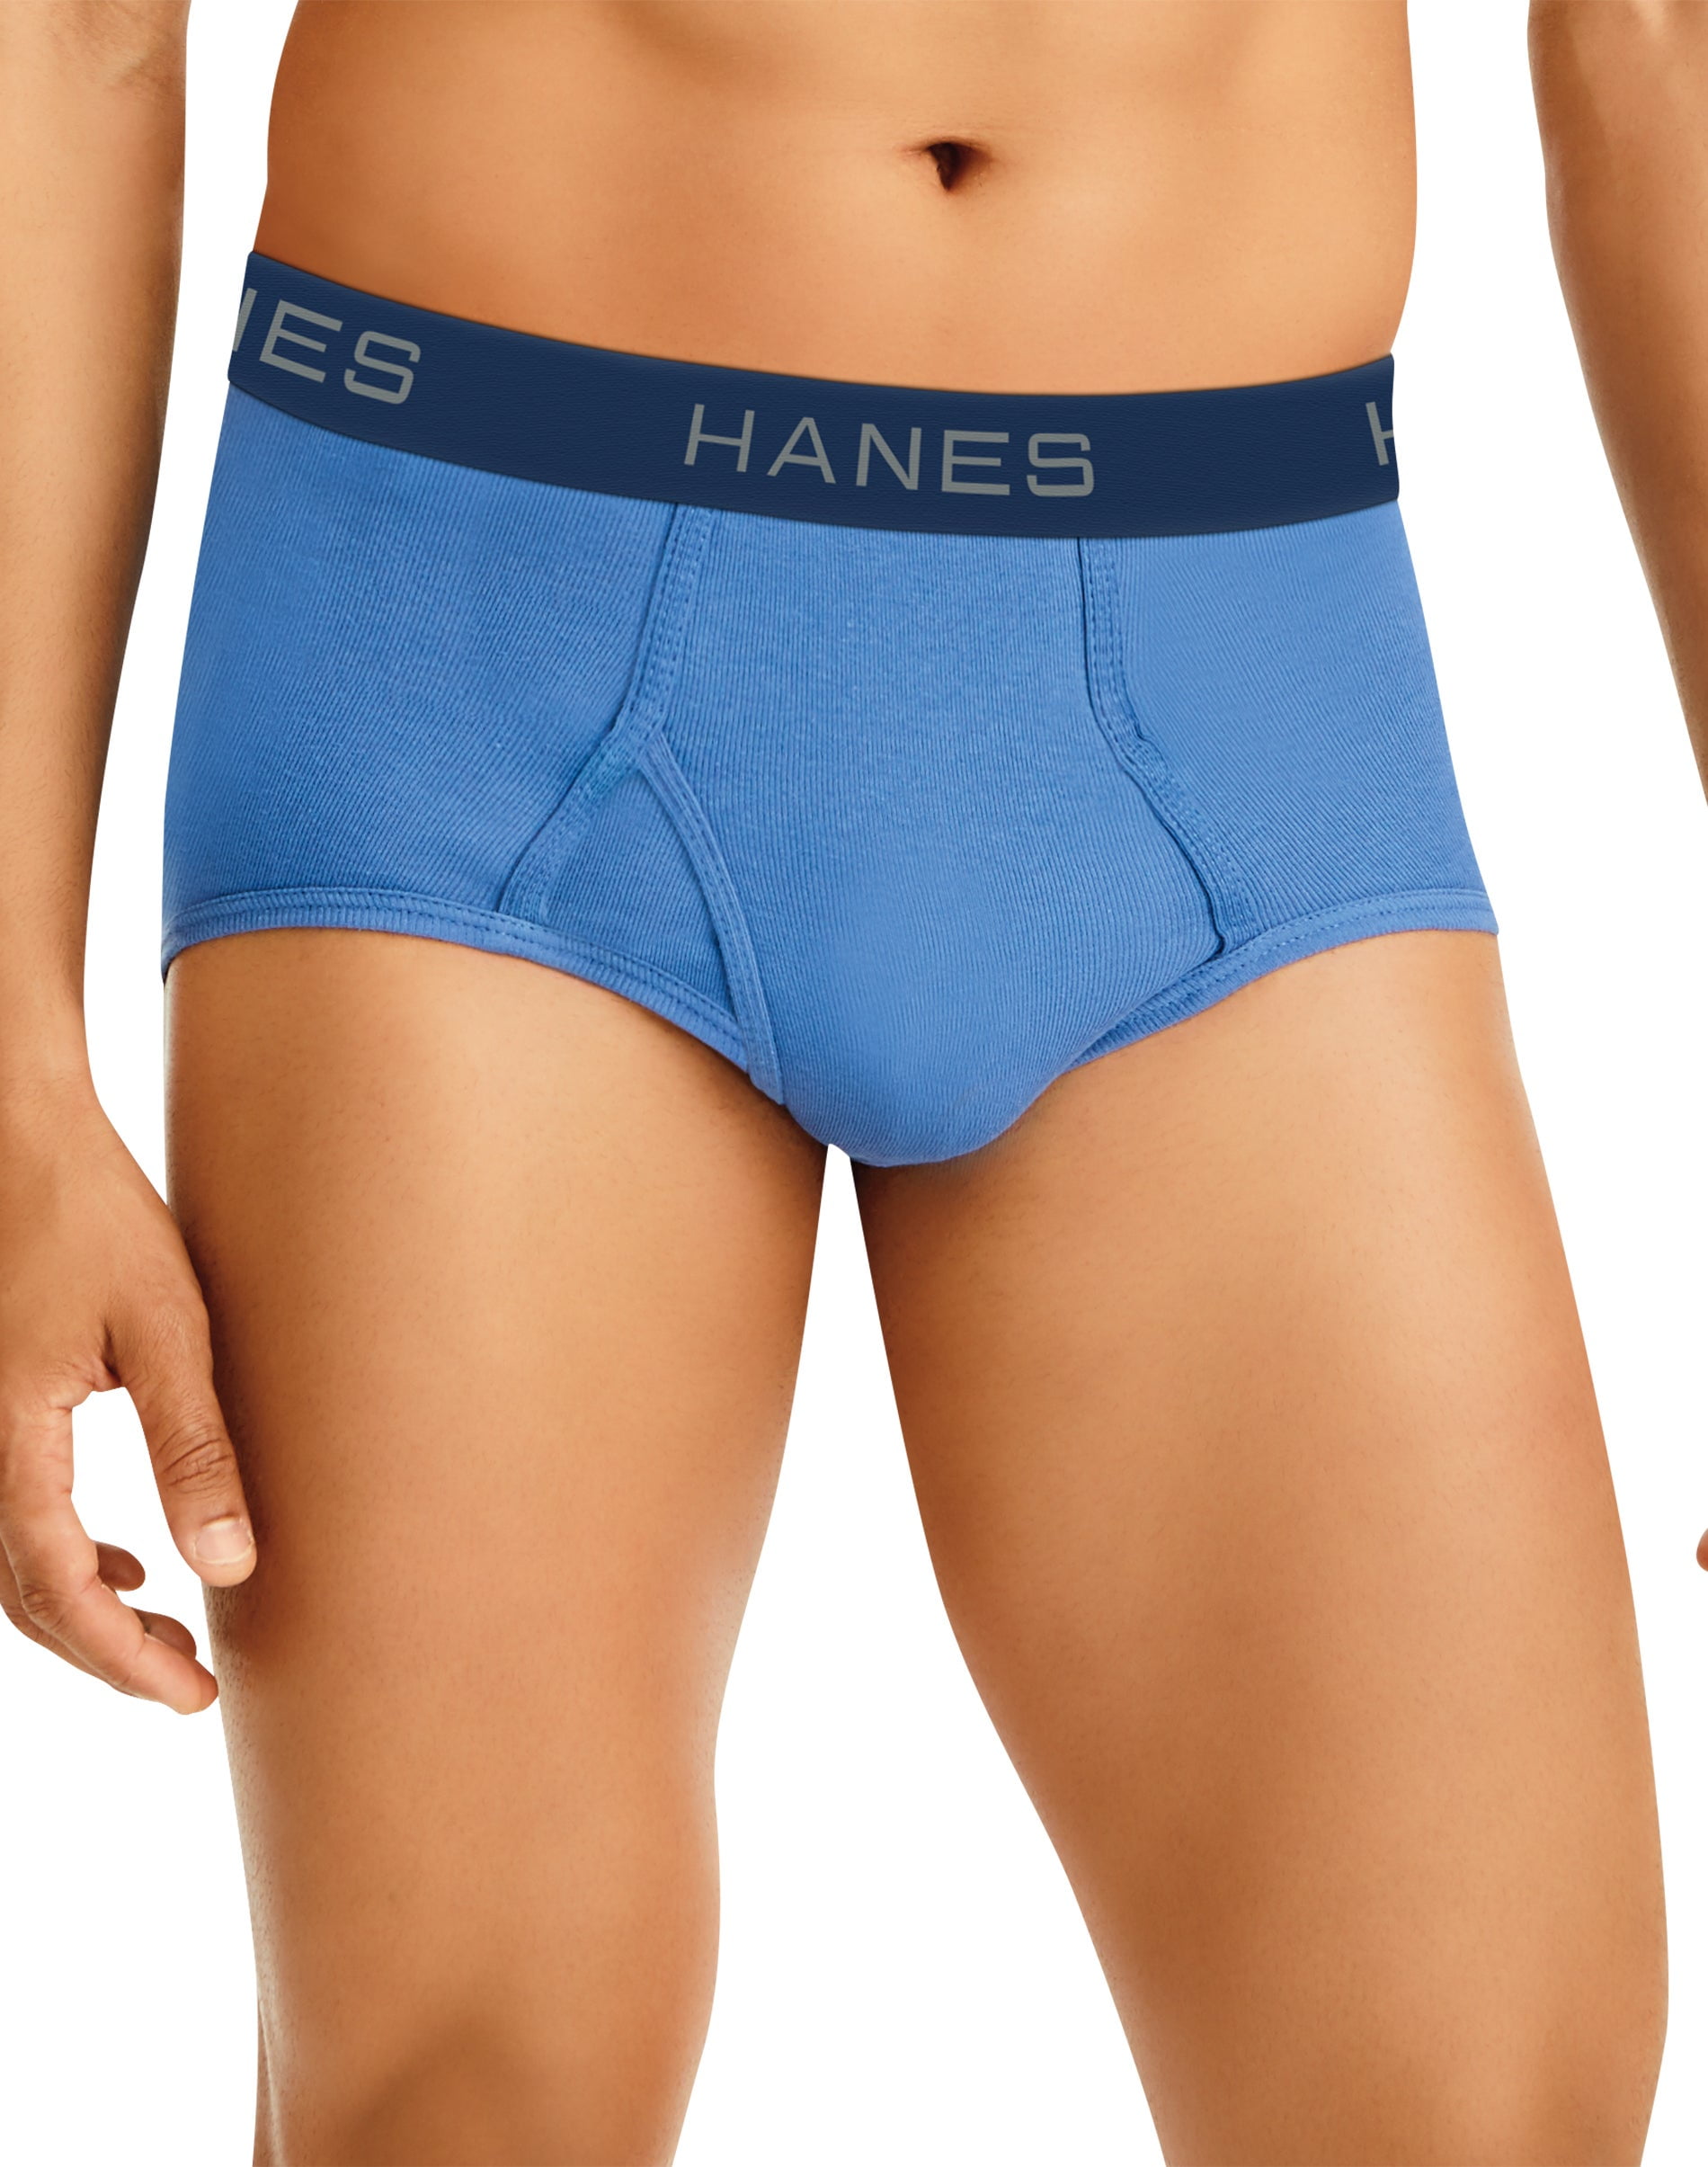 Hanes Men's Moisture-Wicking Cotton Briefs, Available in White and